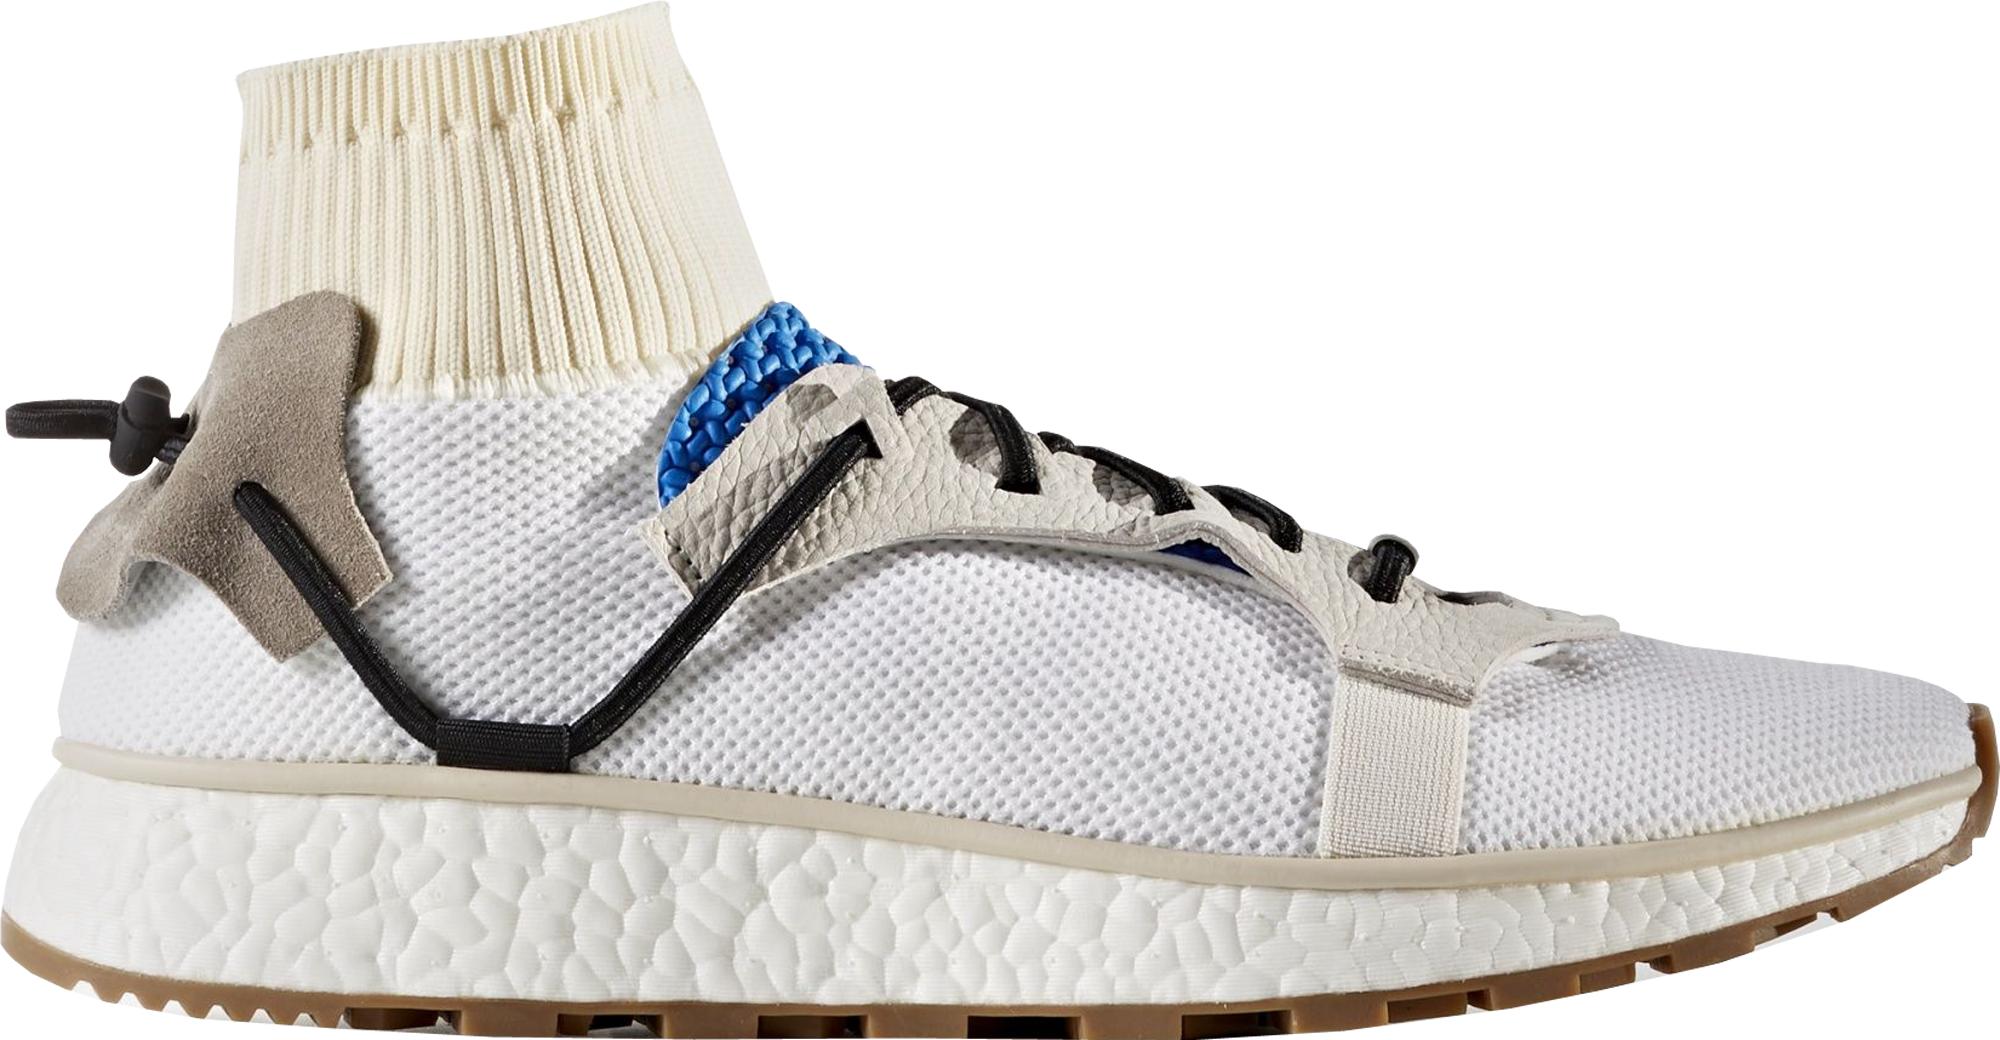 adidas x Alexander Wang AW Shoes Release Dates